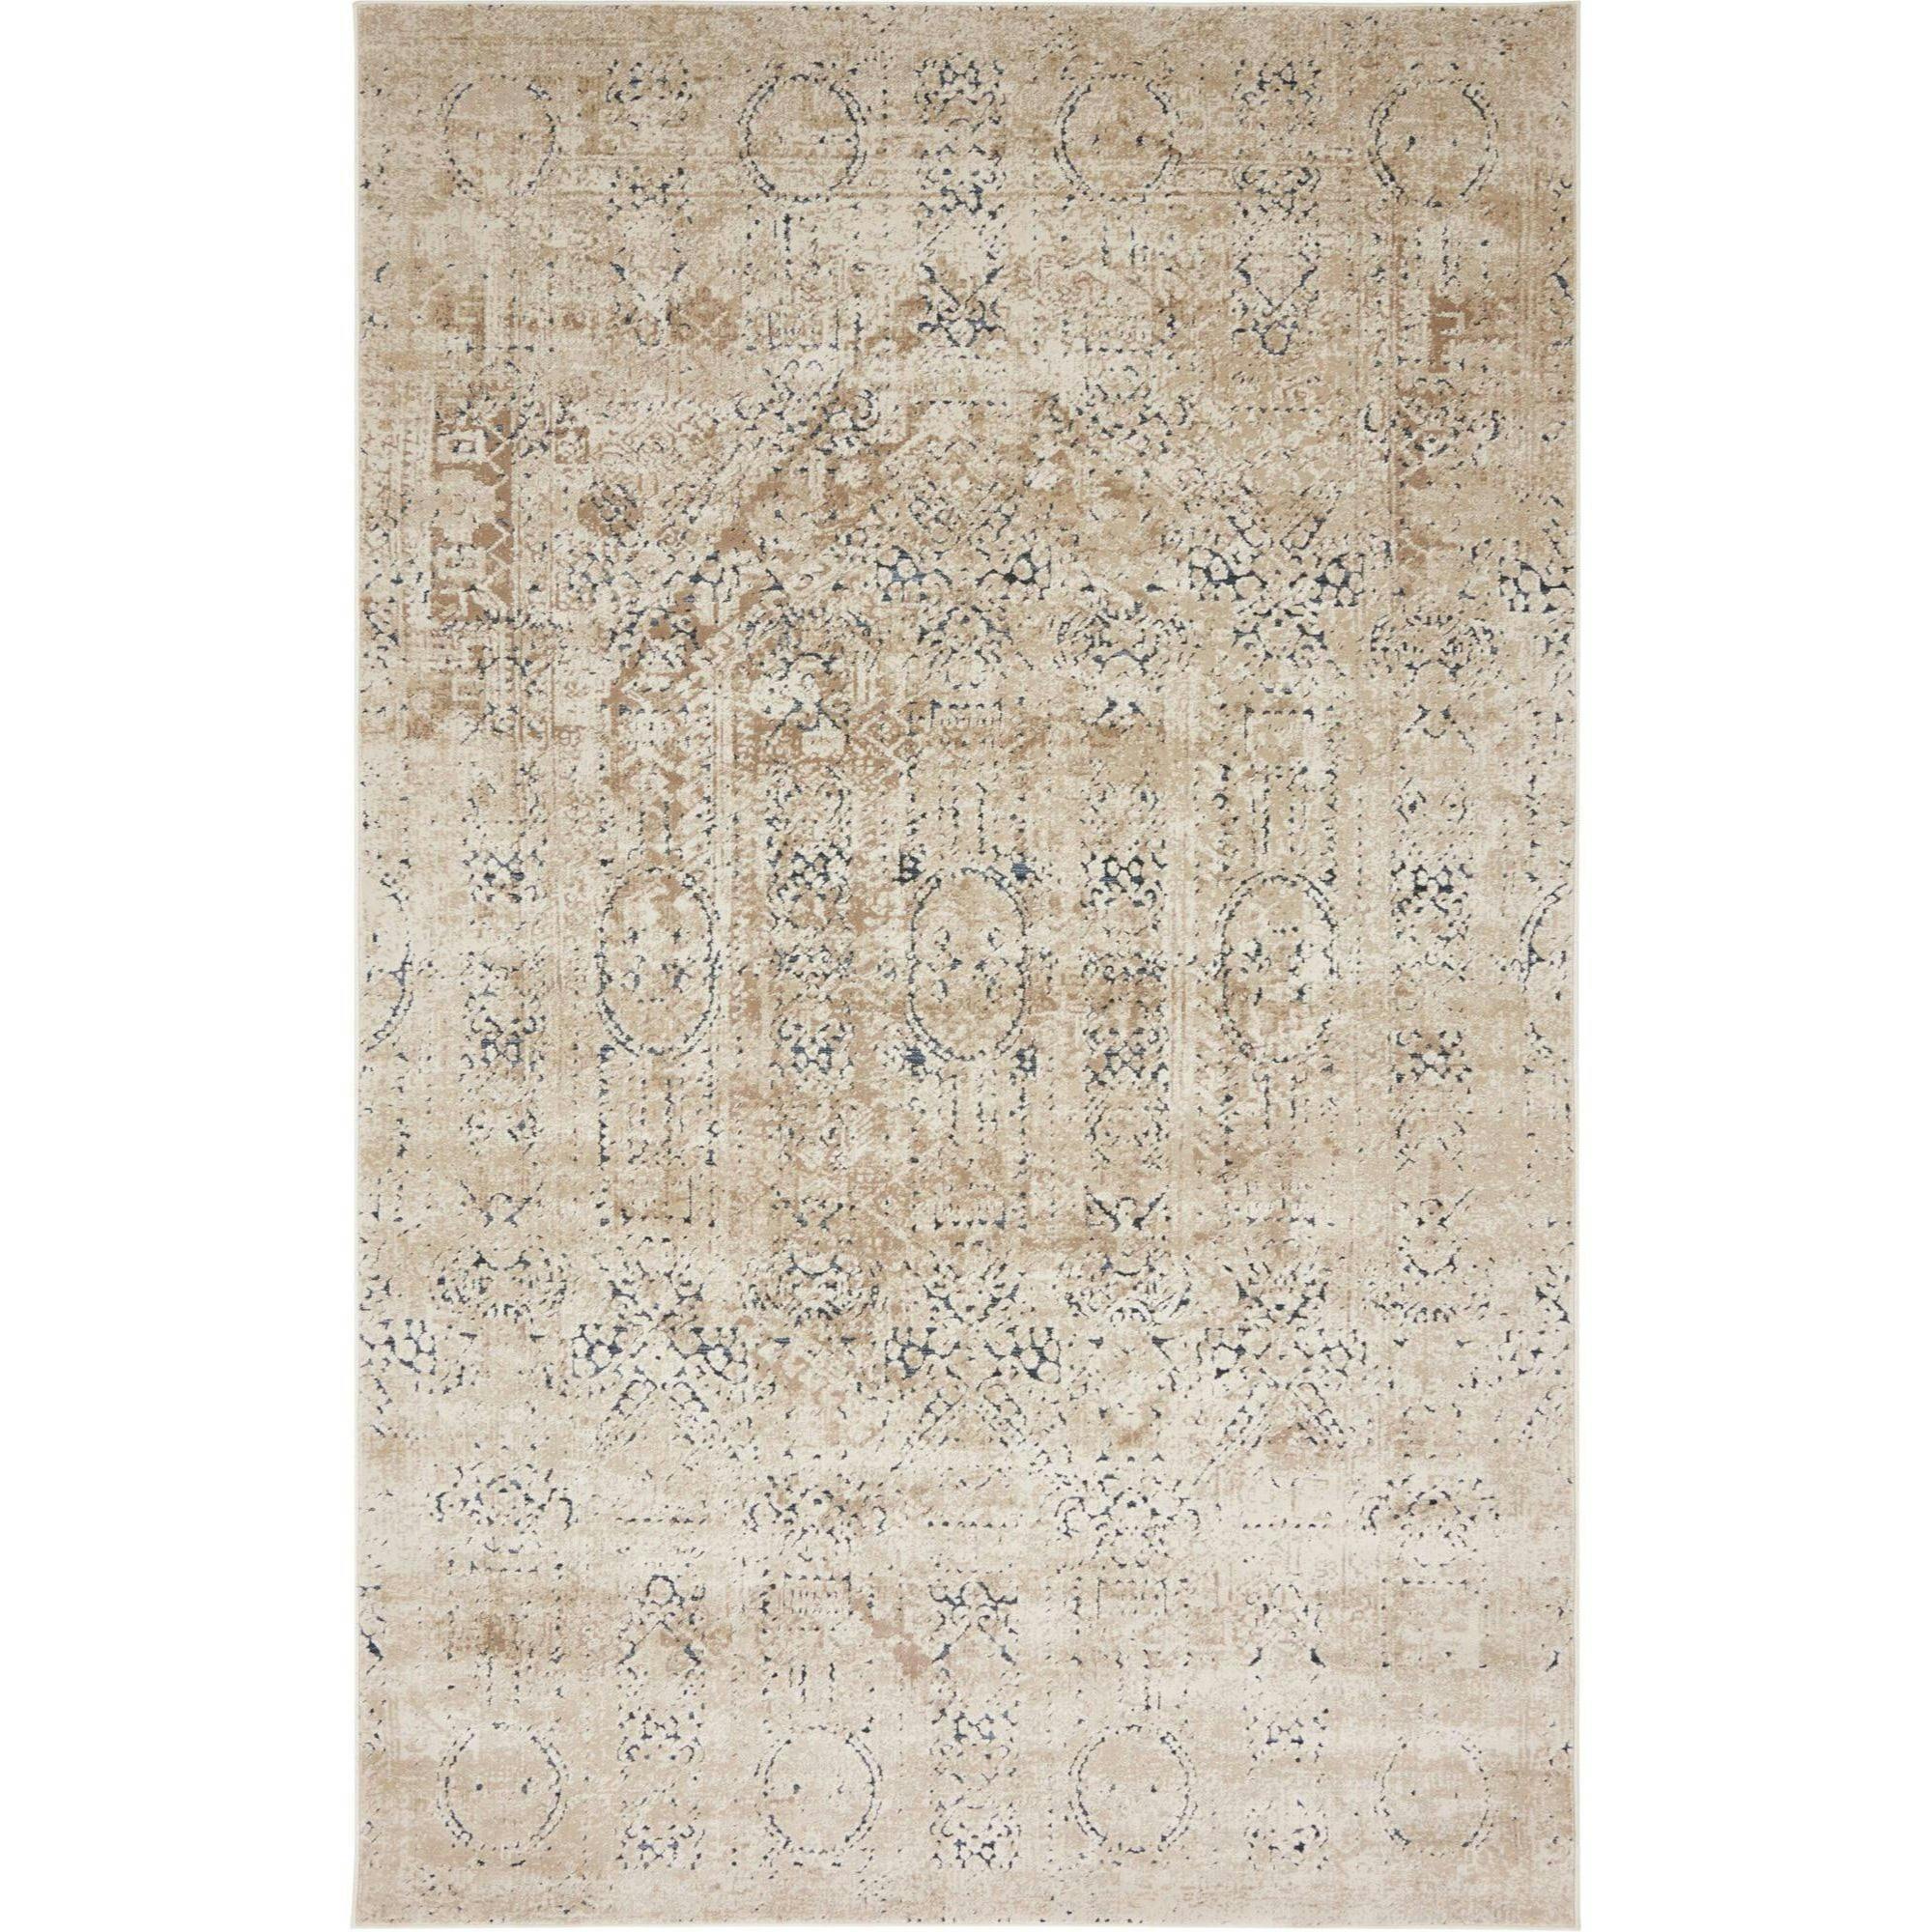 Beige 6' x 9' Rectangular Easy-Care Synthetic Area Rug